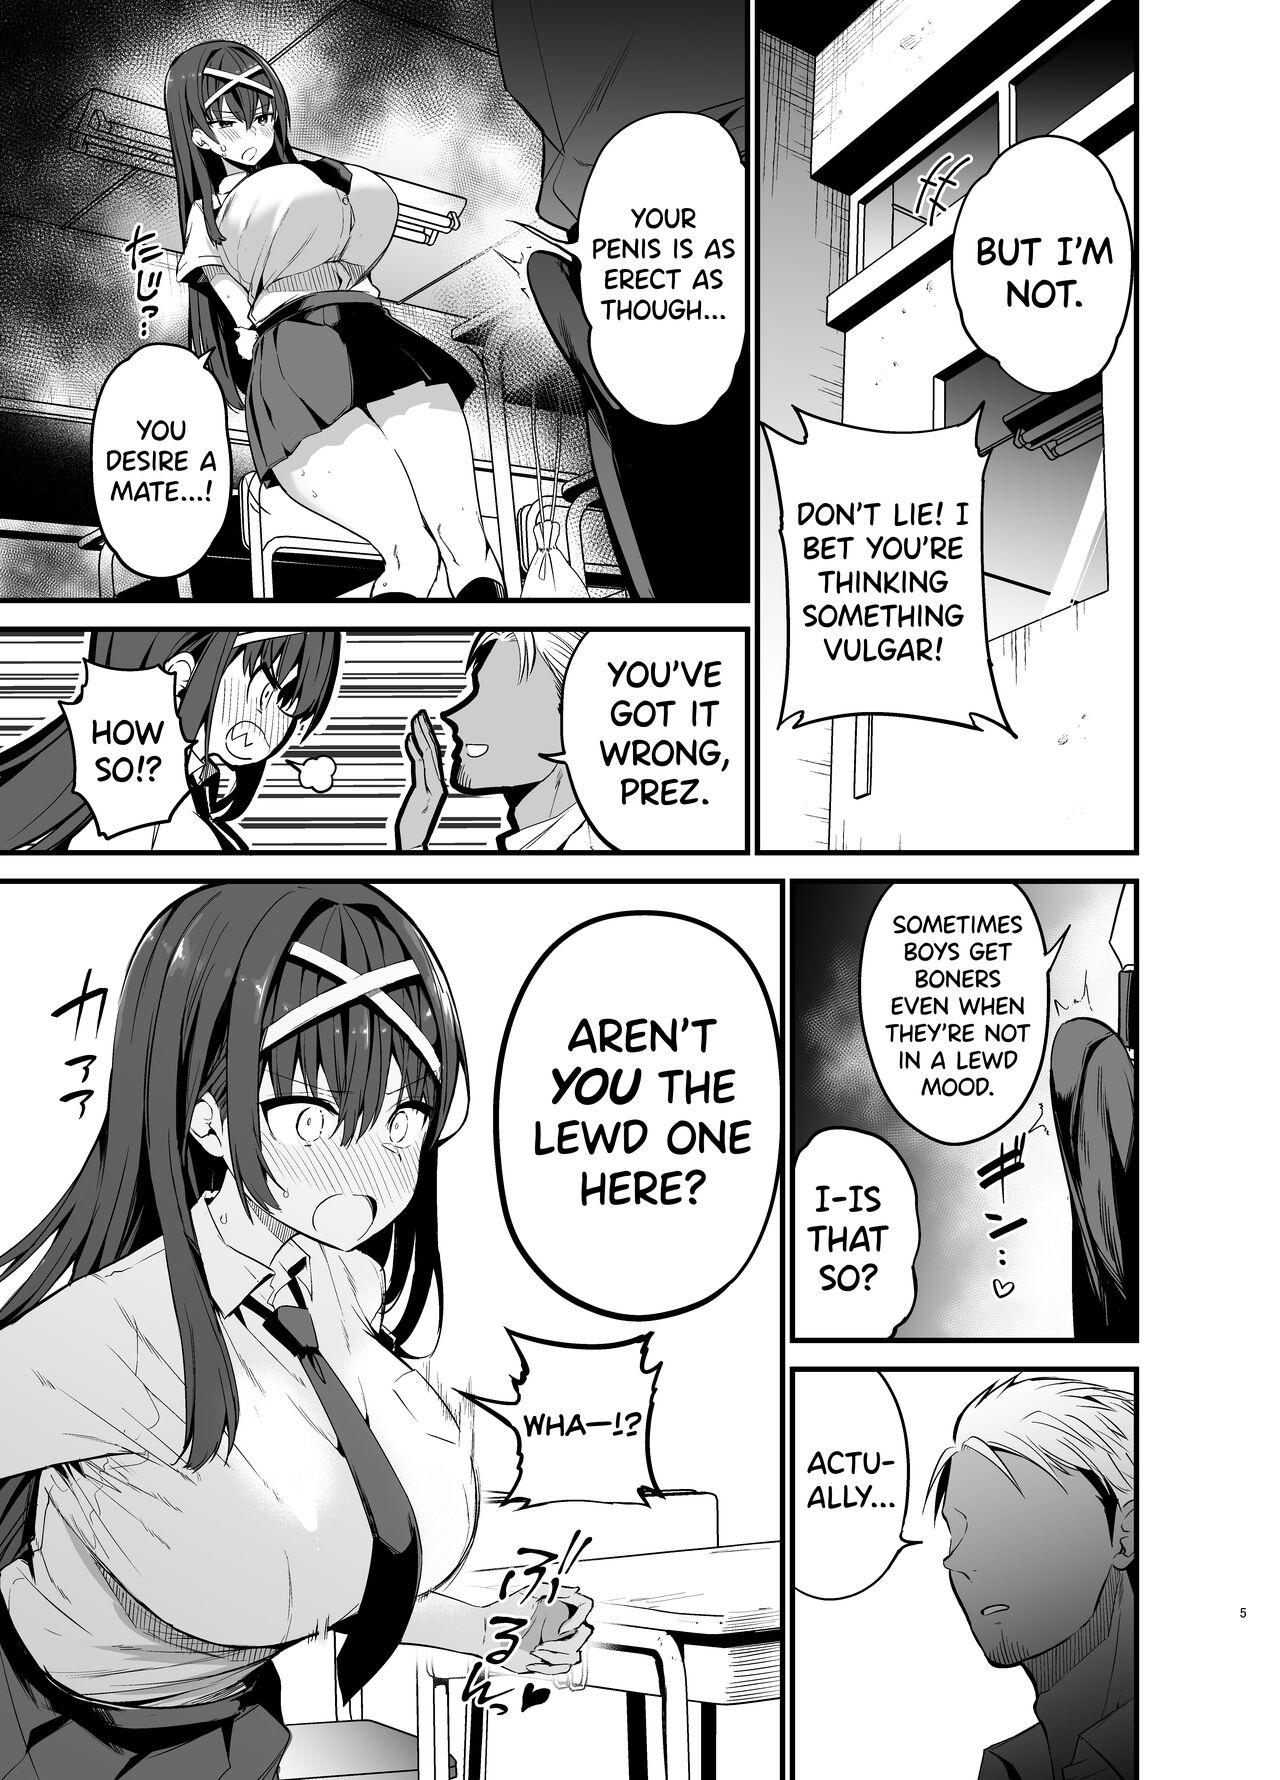 Pay Fuuki Iinchou ga Ochiru made | The Fall of the Morals Committee Persident - Original Audition - Page 4